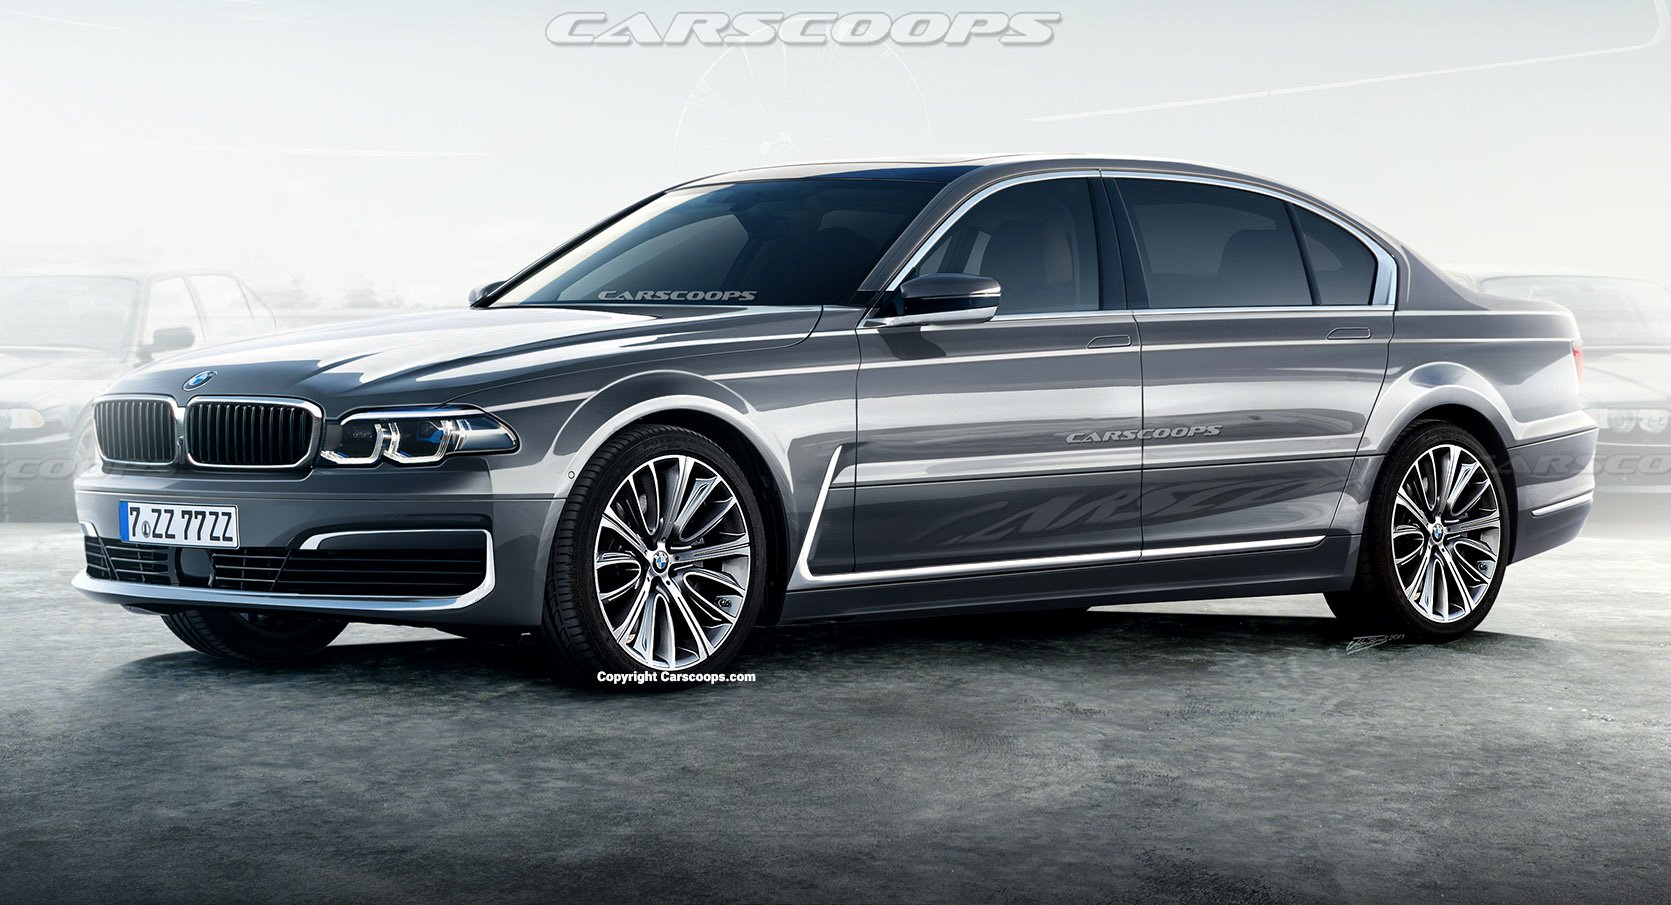 BMW 7-Series: What If The Next Gen Was Inspired By The E38?